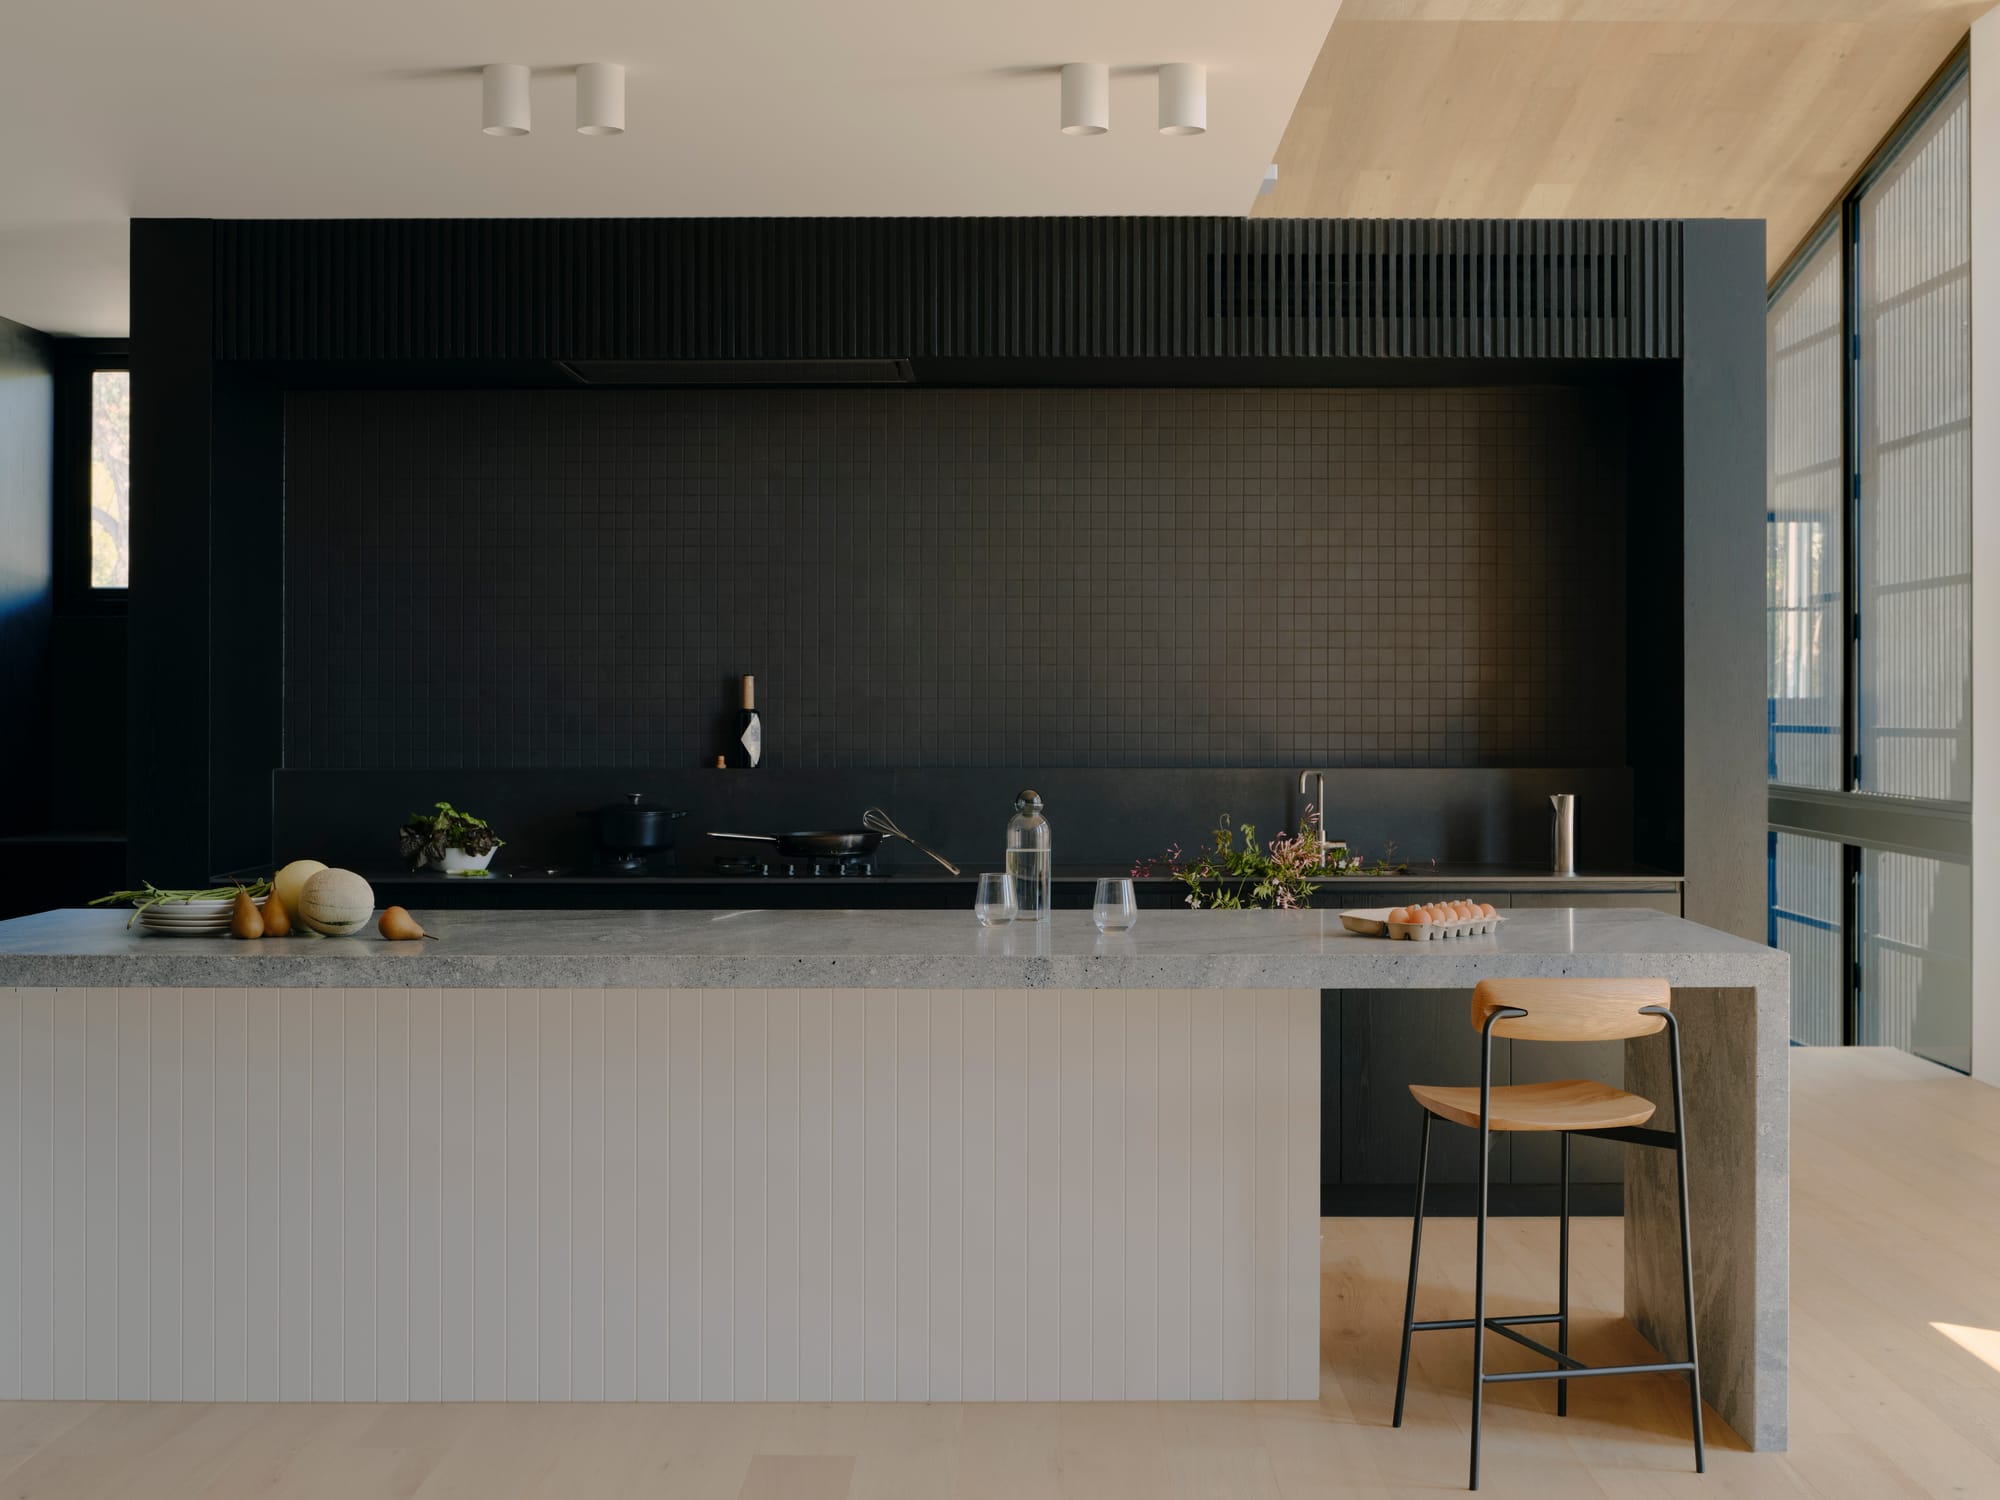 Courtside House by Tom Robertson Architects. Photography by Tom Ross. Modern residential kitchen with white timber clad island bench with granite benchtop. Black tiles splashback. Light timber floors.